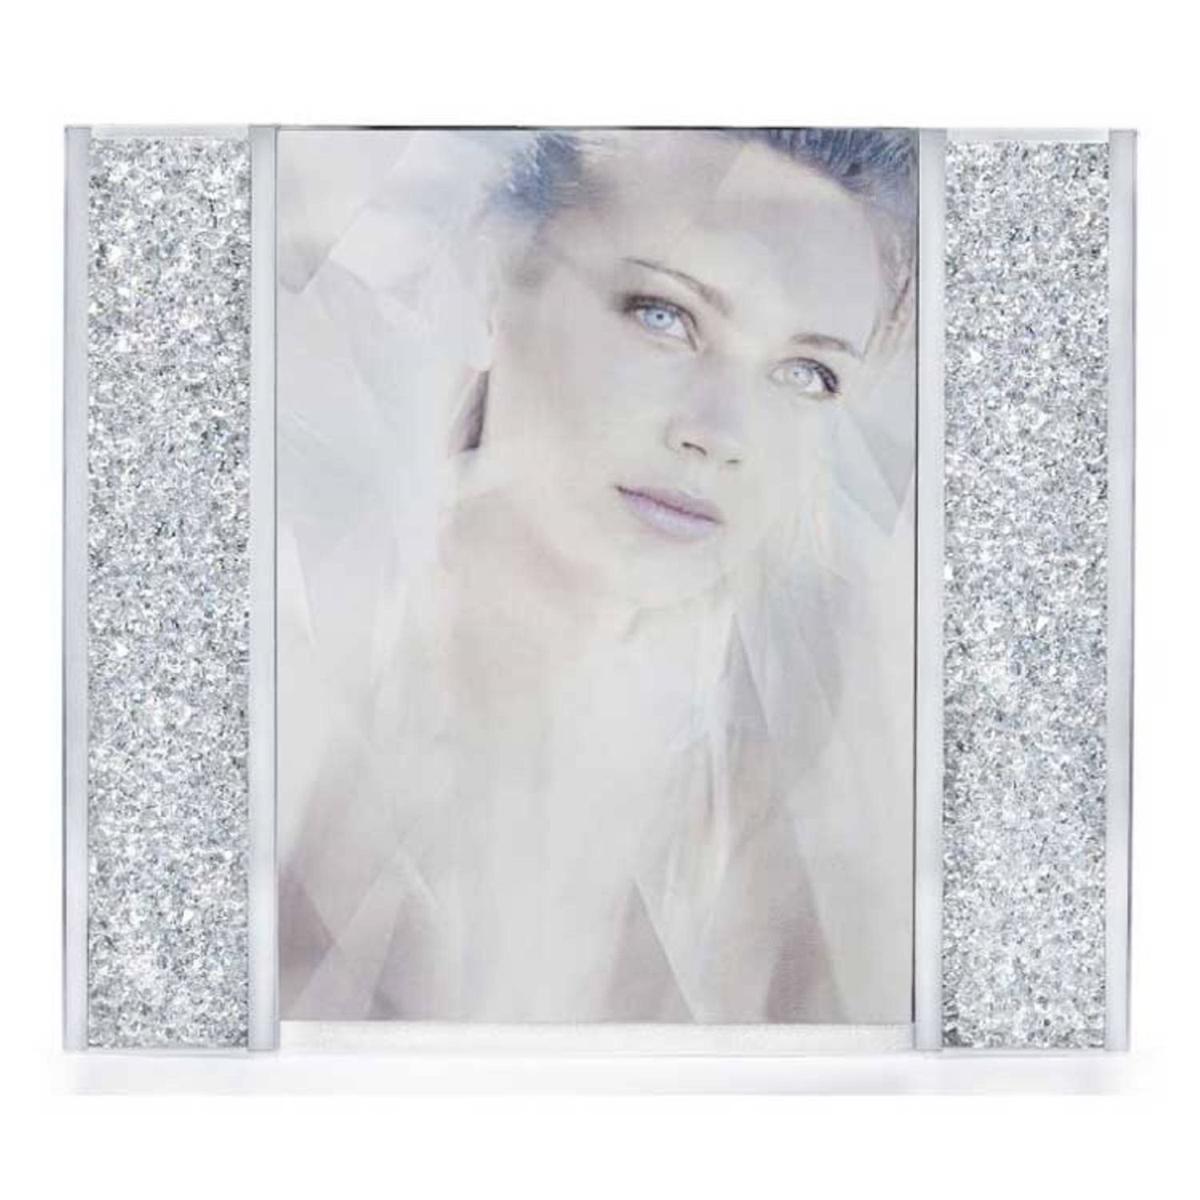 Jiallo 16042 5 x 7 in. Starlet Crystal Filled Photo Picture Frame